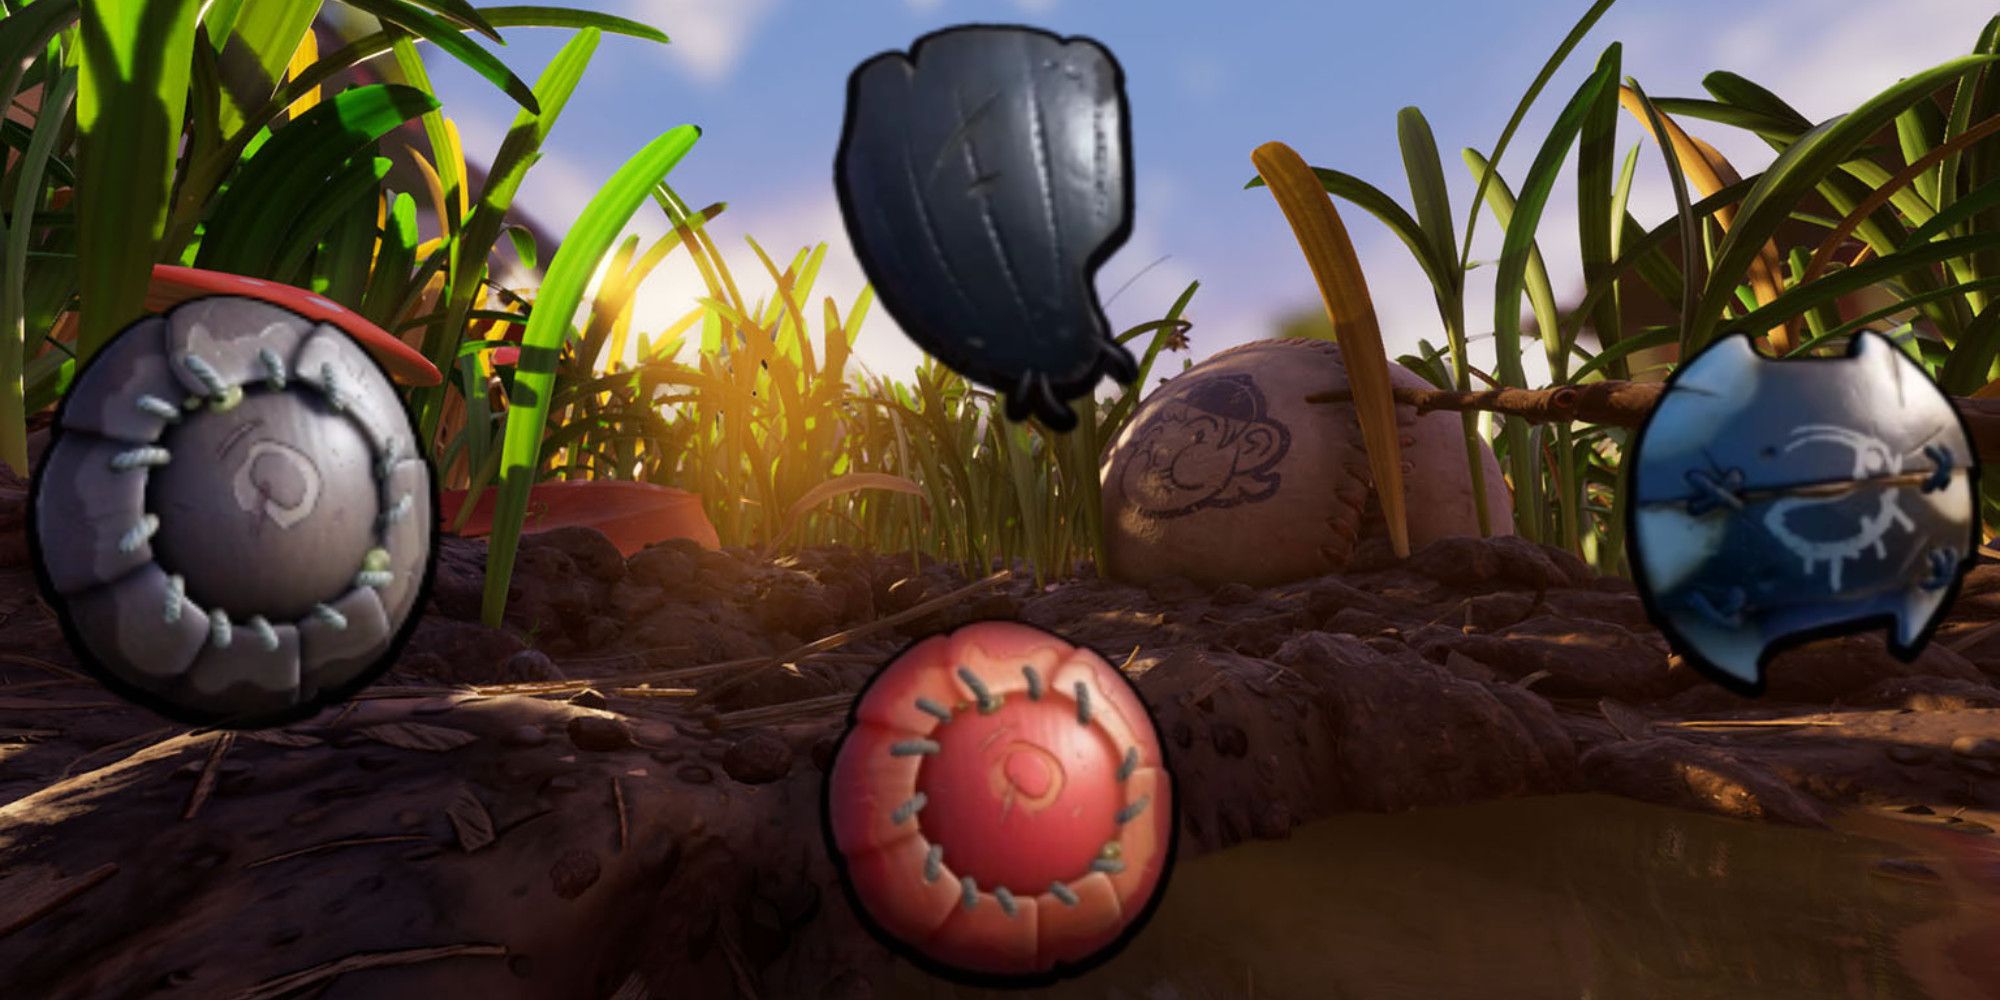 All four shields in Grounded in front of the game's Grasslands biome